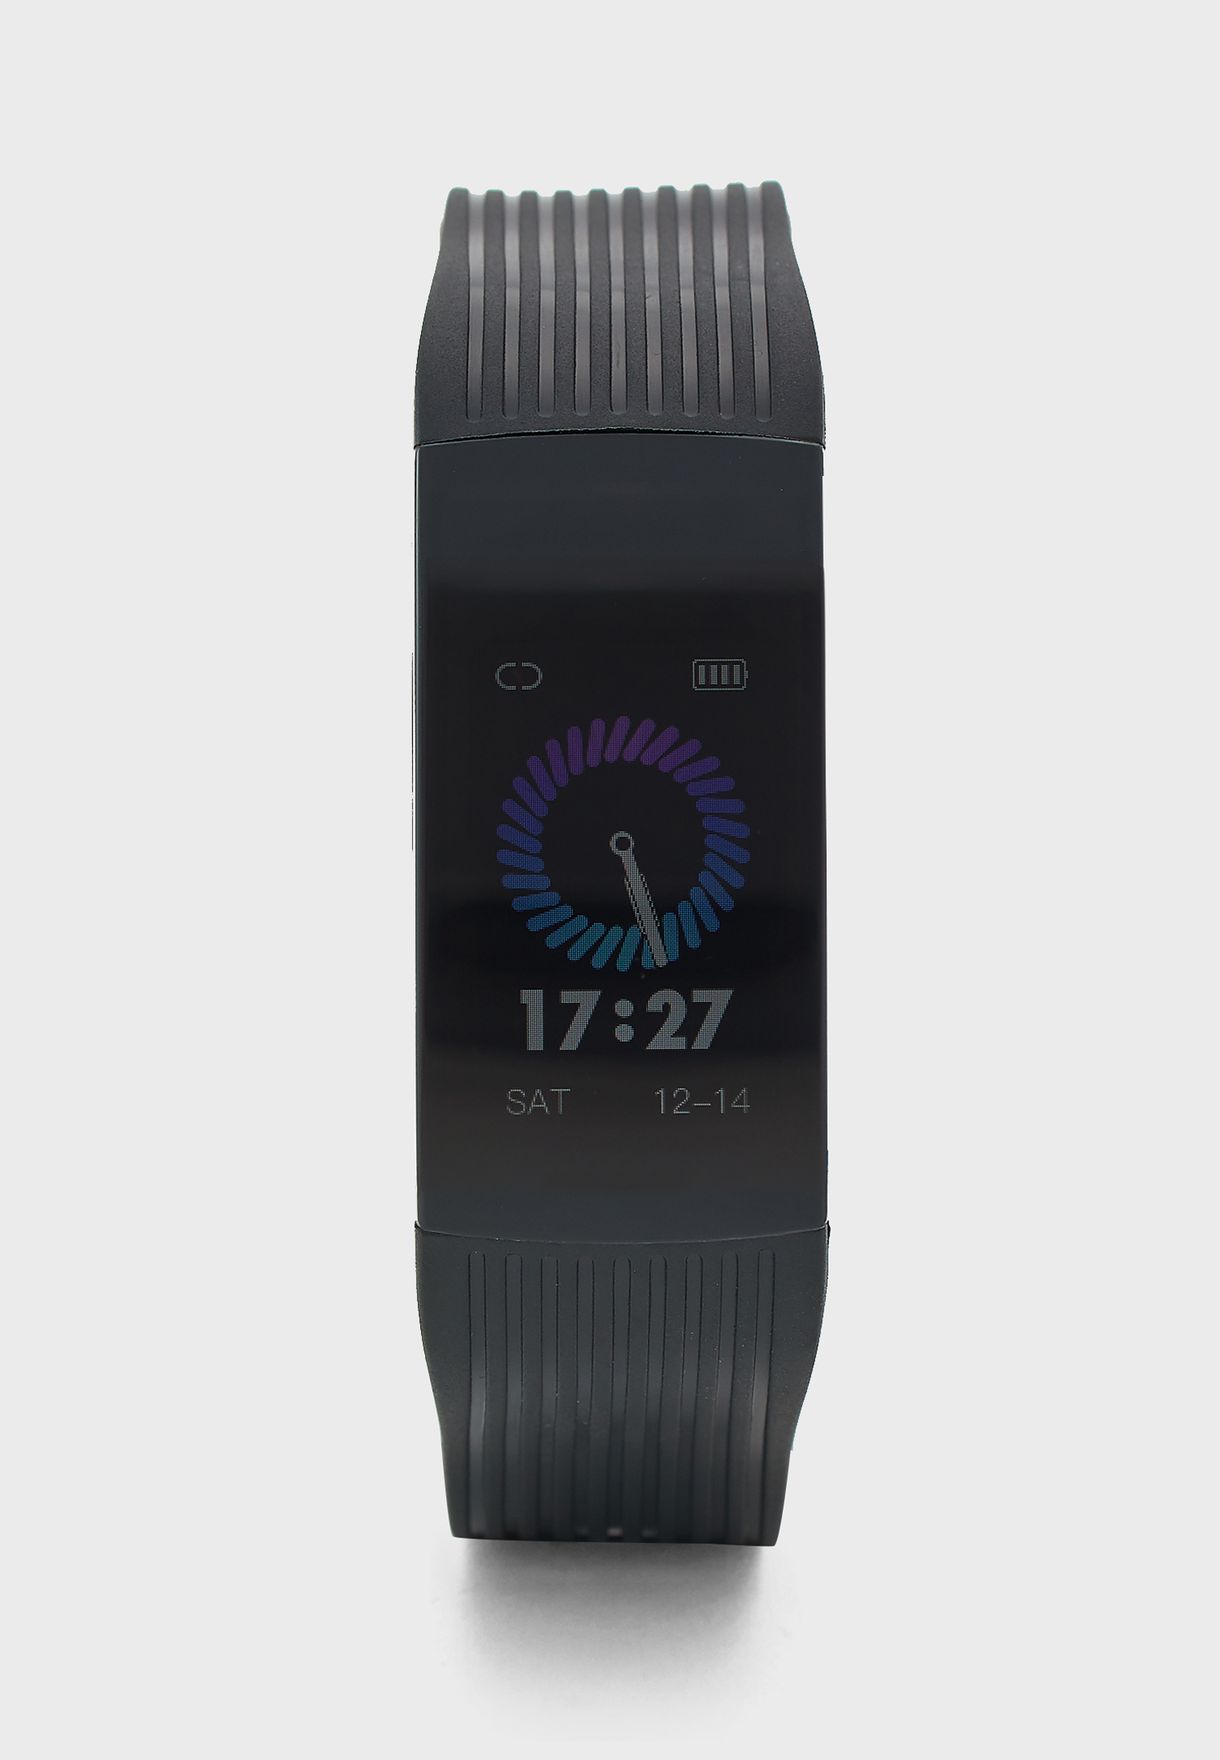 Smart Bracelet With Heart Rate Feature